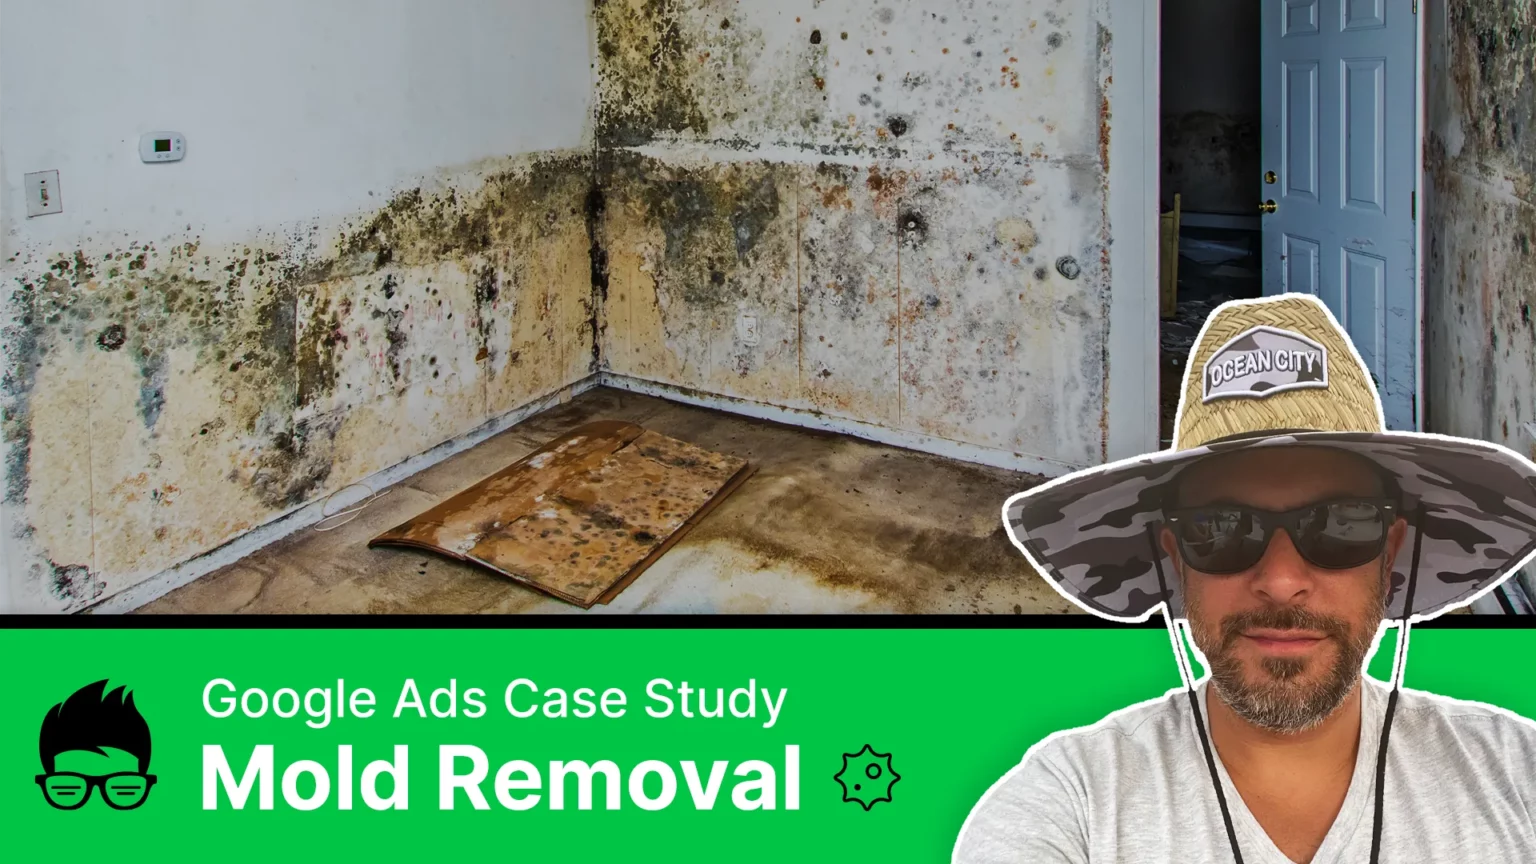 Google Ads Case Study - Mold Removal Video Cover Img